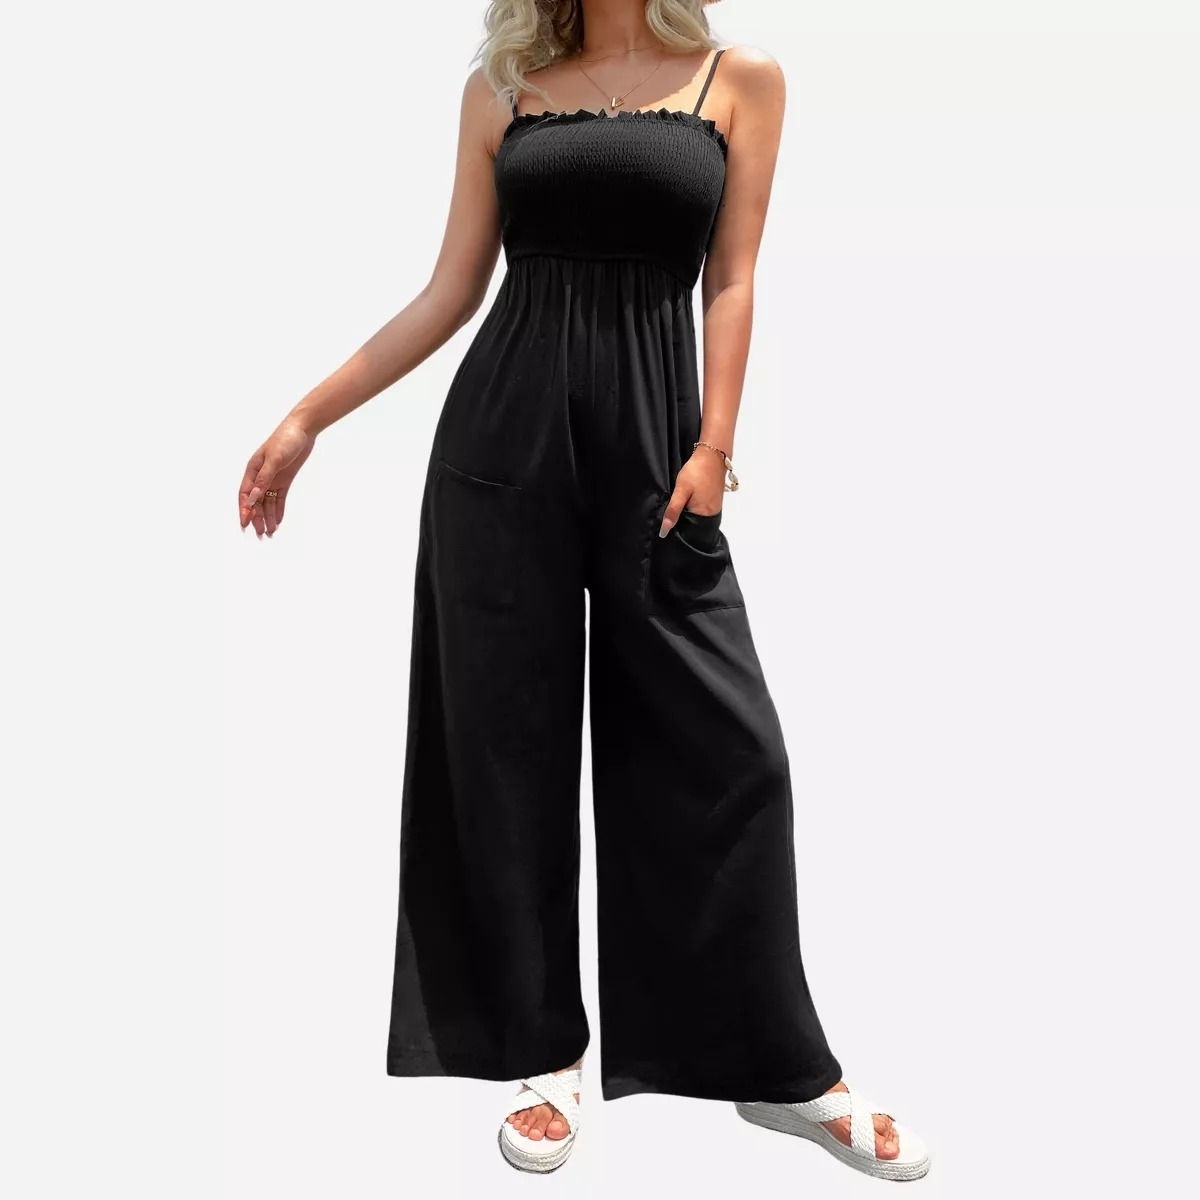 black jumpsuit and spaghetti straps on model